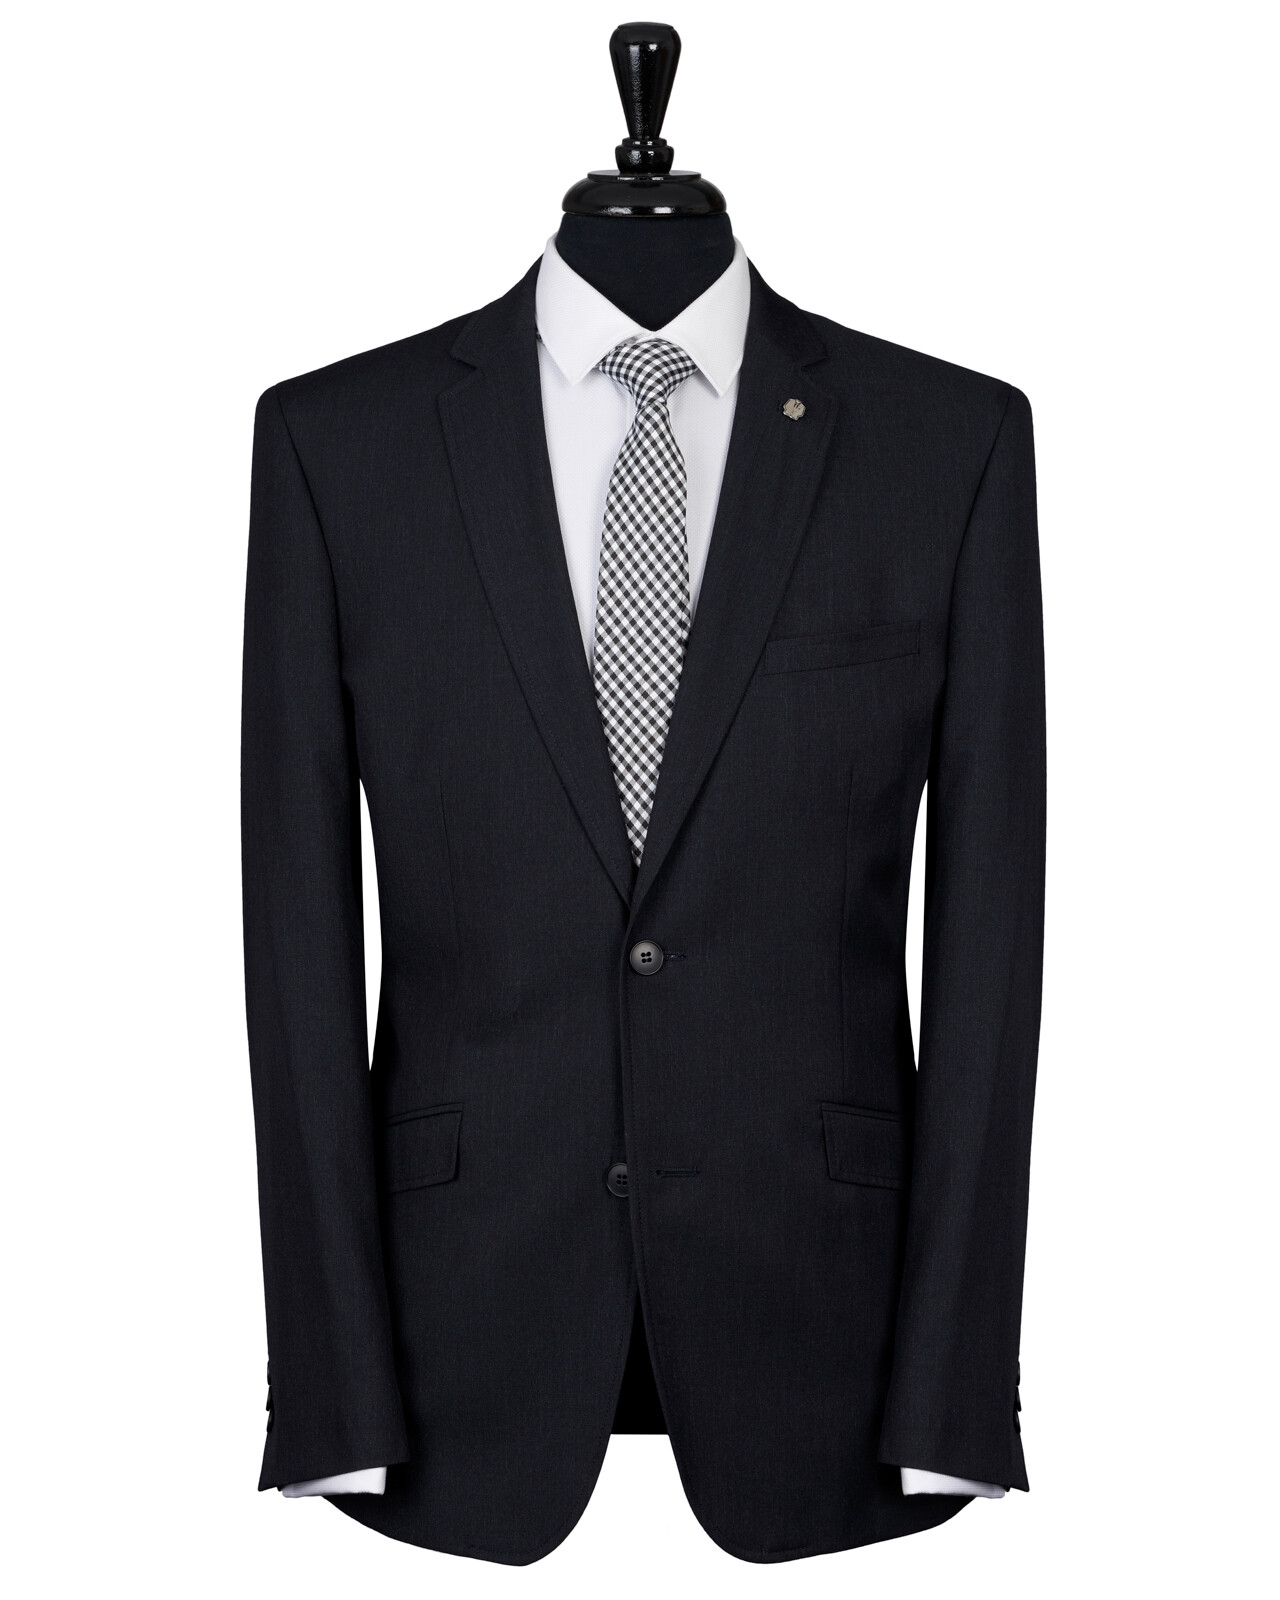 Christian Brookes Charcoal Lounge Suit - Hire or Buy - Black Jacket Suiting